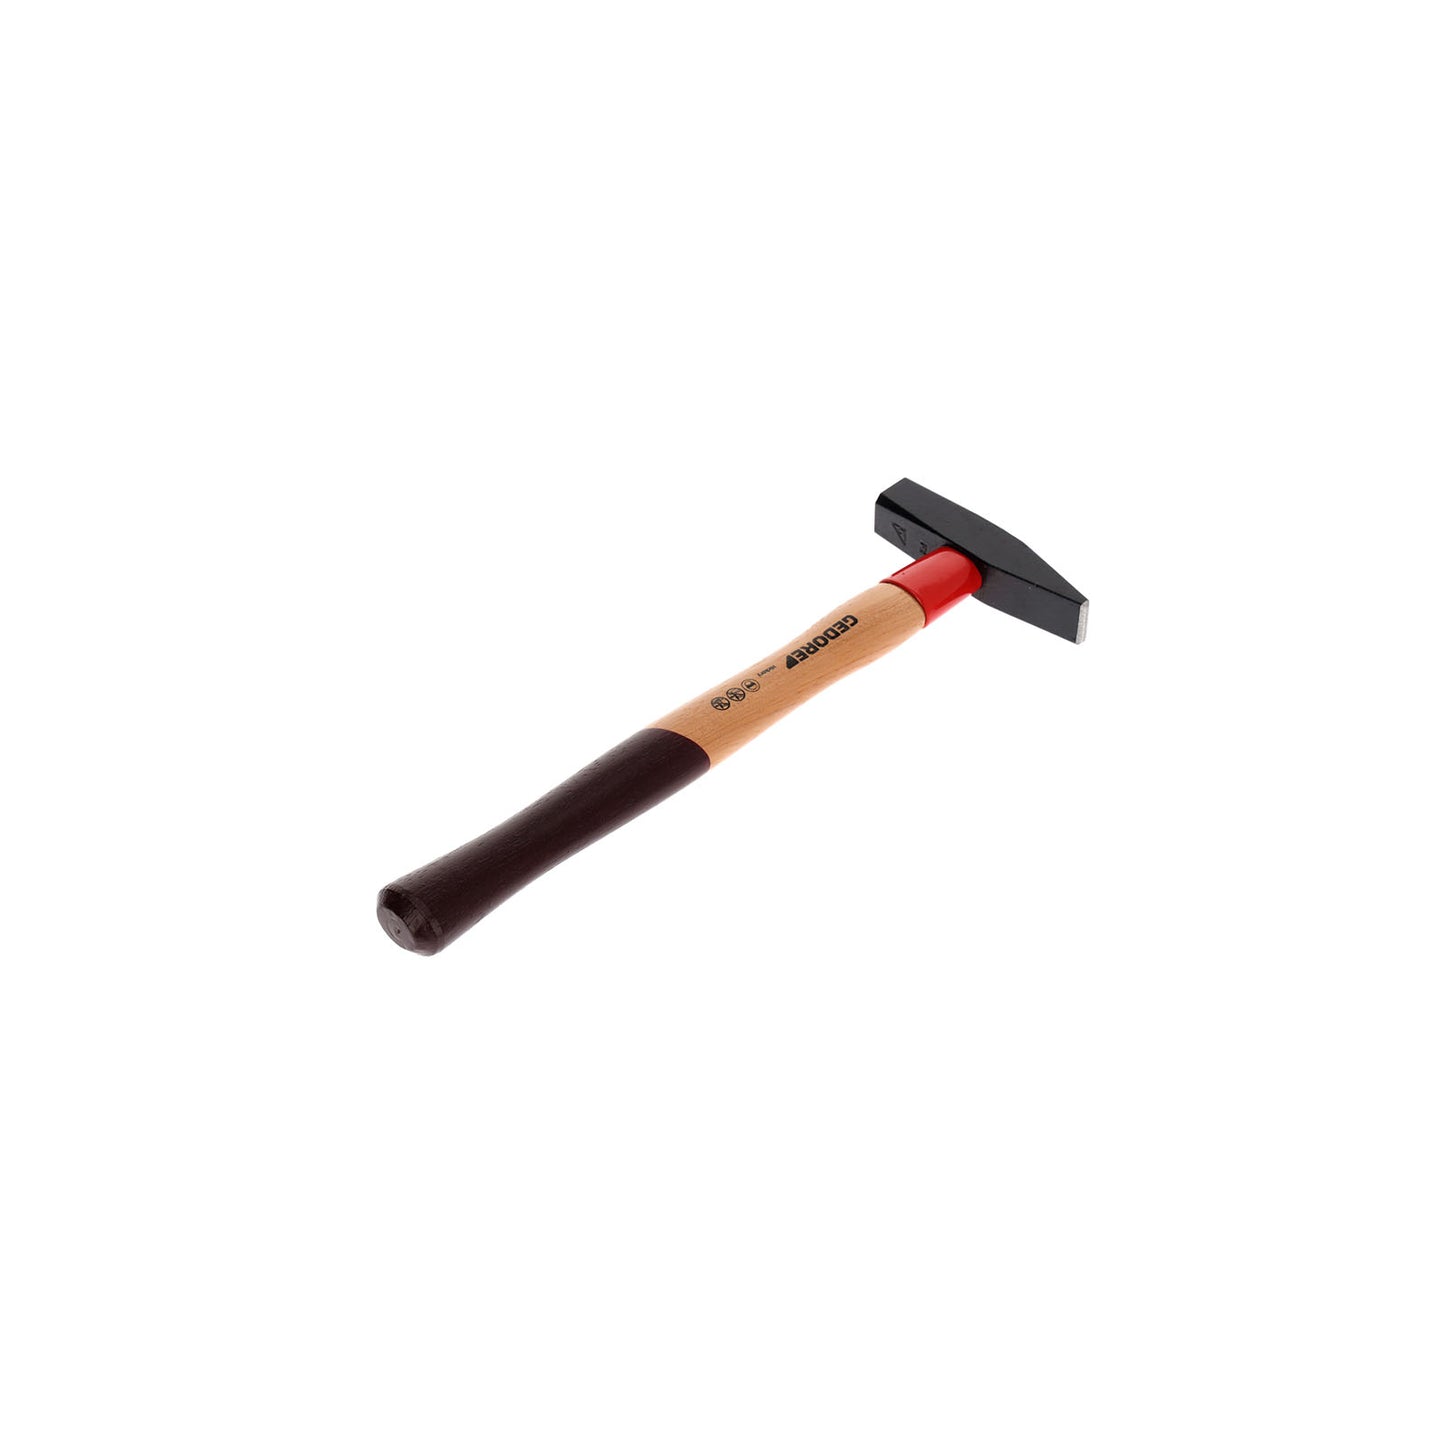 GEDORE 600 H-200 - ROTBAND assembly hammer 200g (8582930)